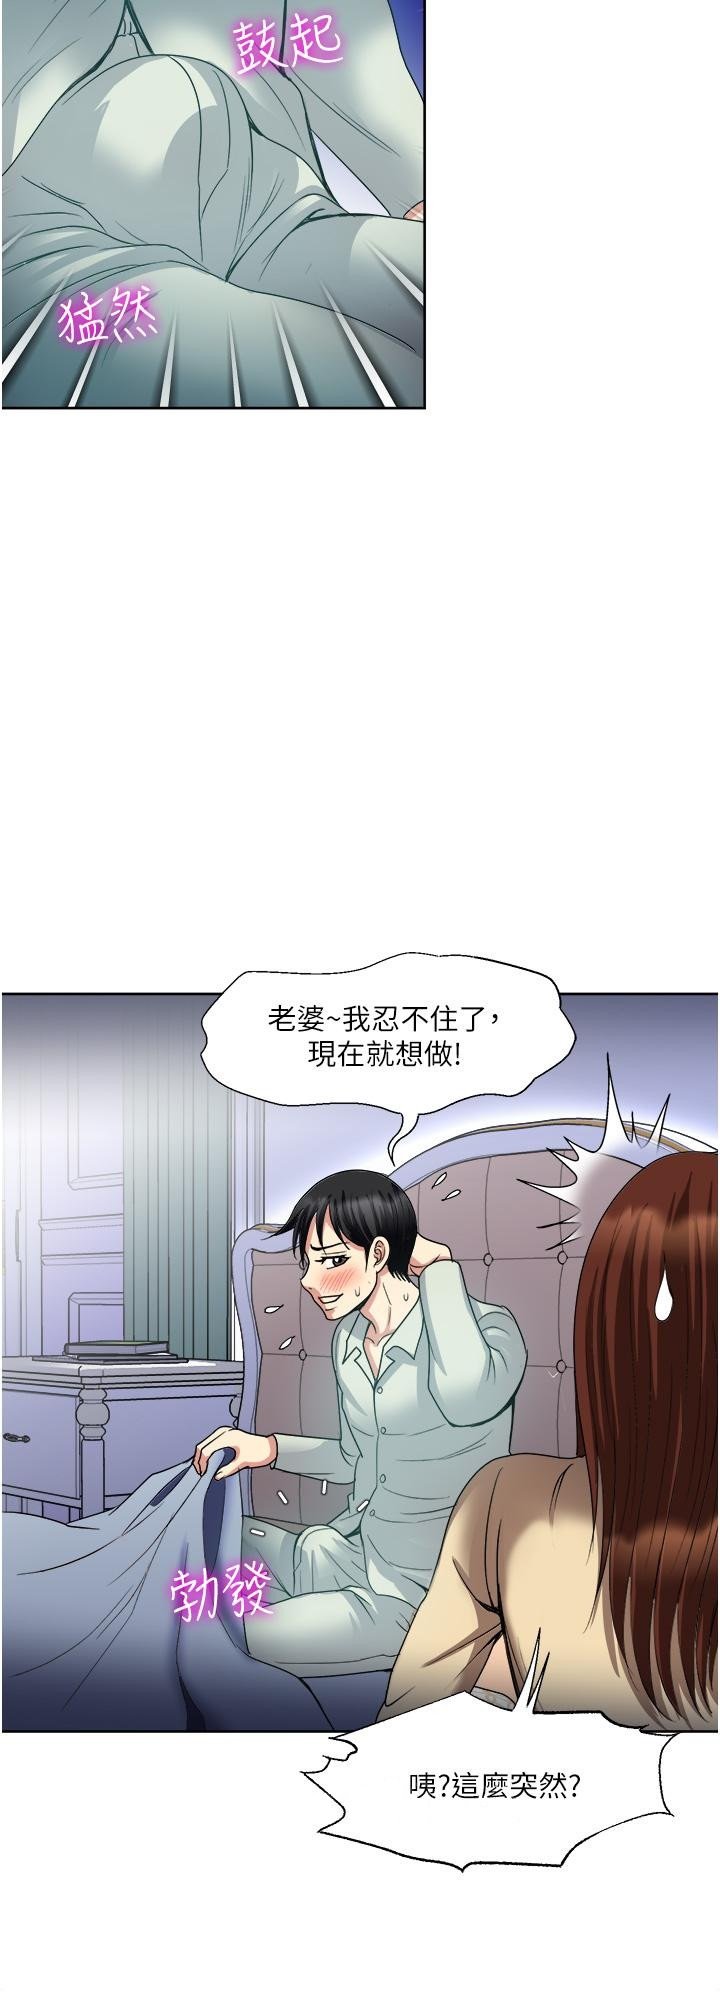 just-once-raw-chap-31-37